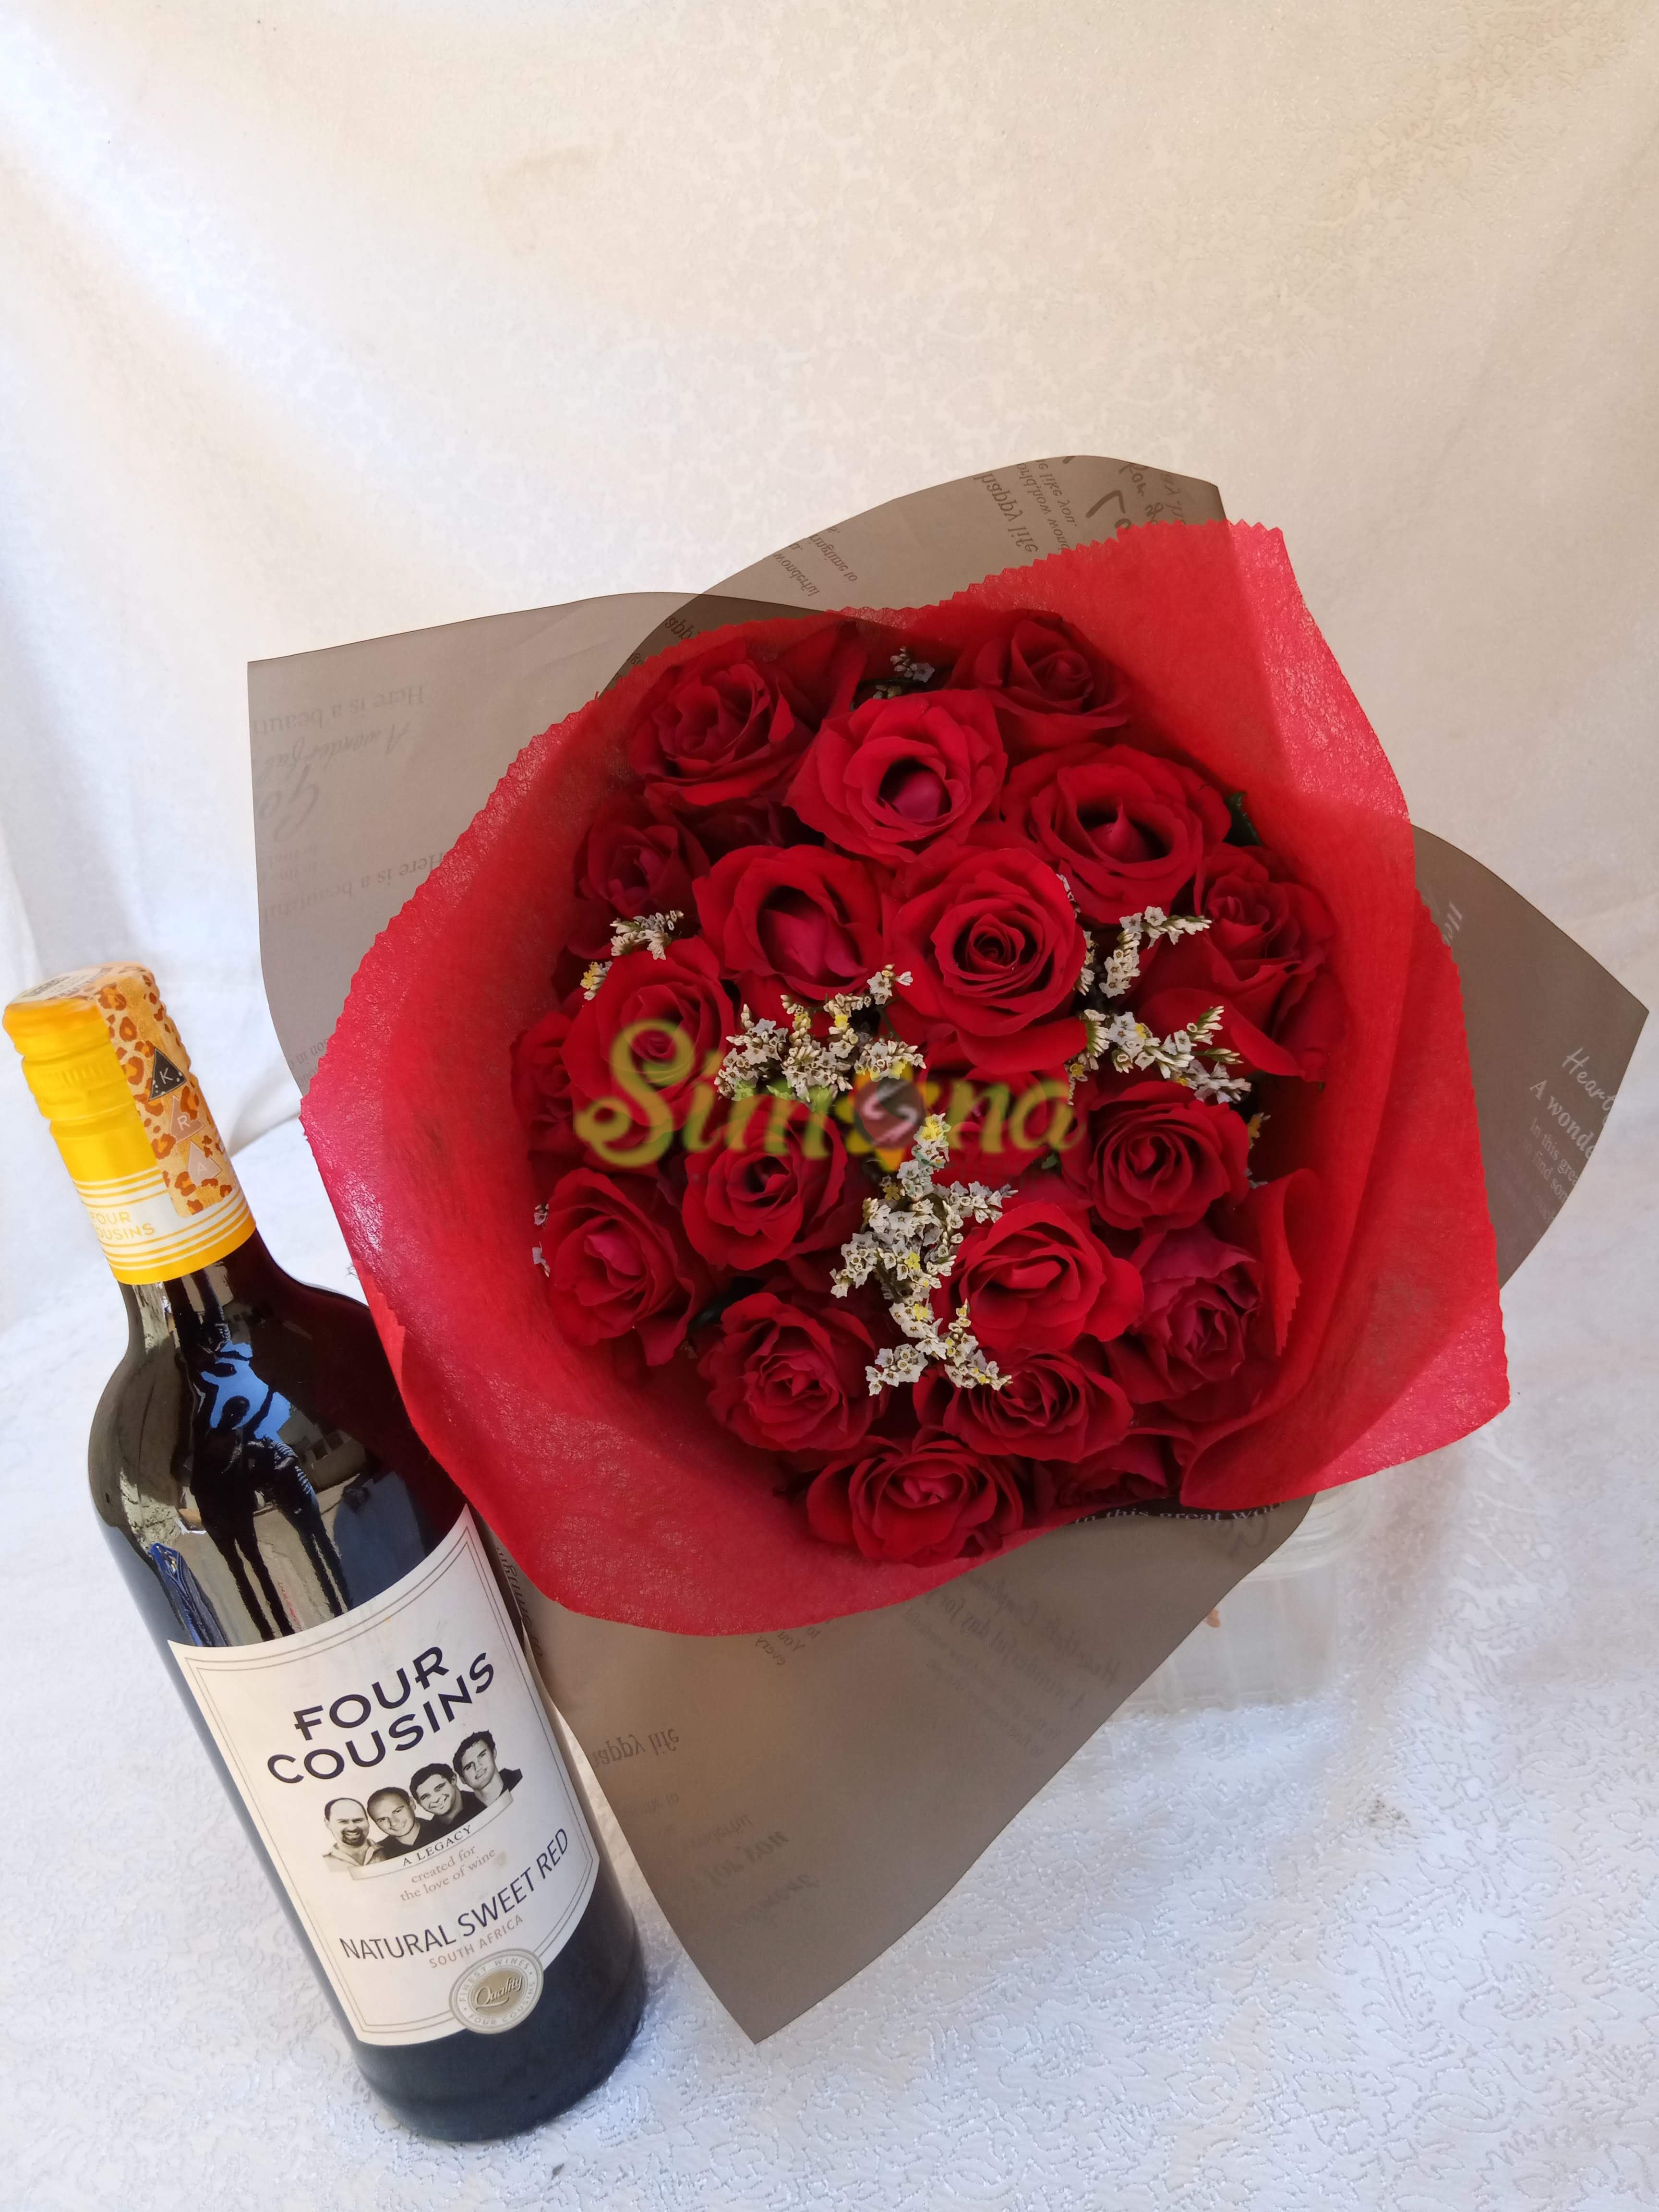 Delightful hand bouquet with red wine